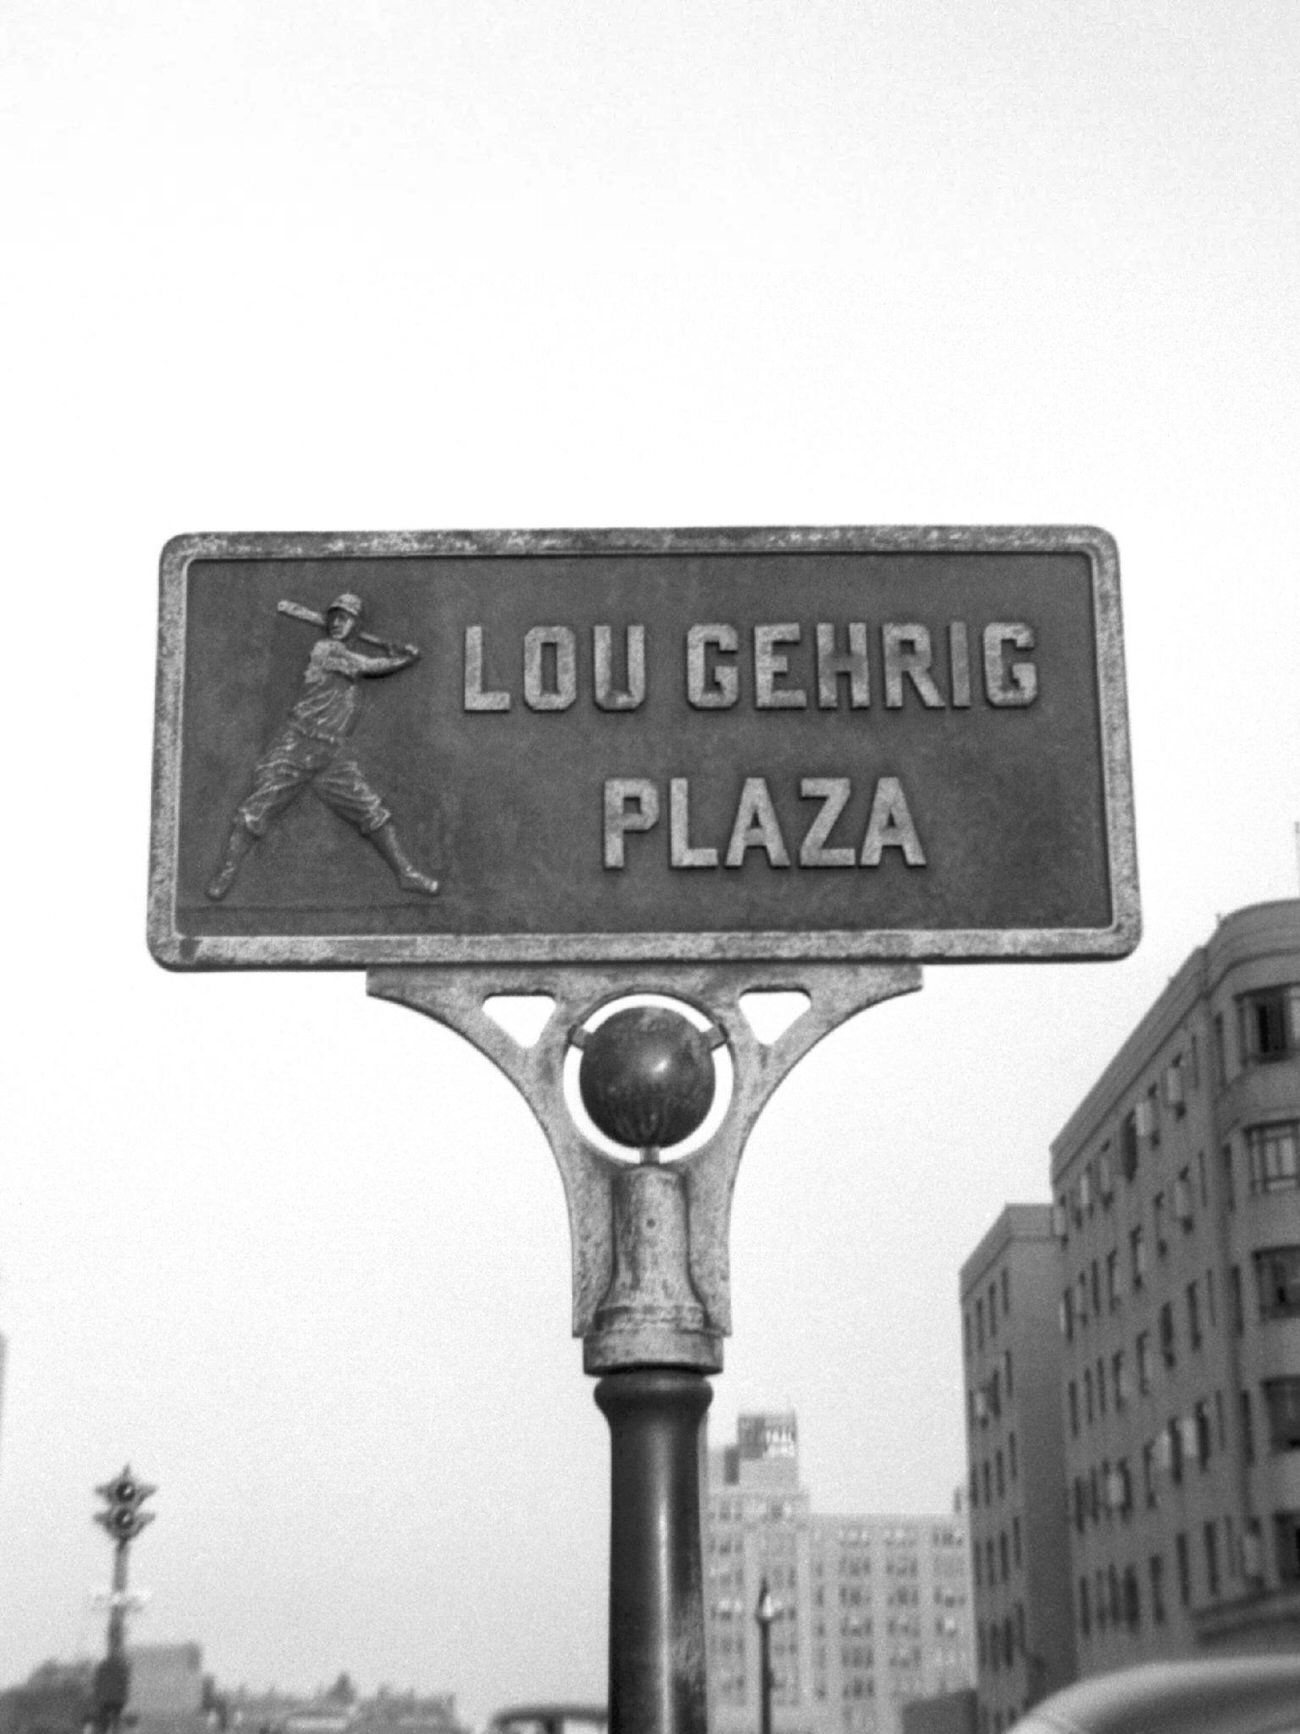 The Lou Gehrig Plaza Marker Outside Yankee Stadium Honors The First Baseman And Captain For The Yankees, 1950S.